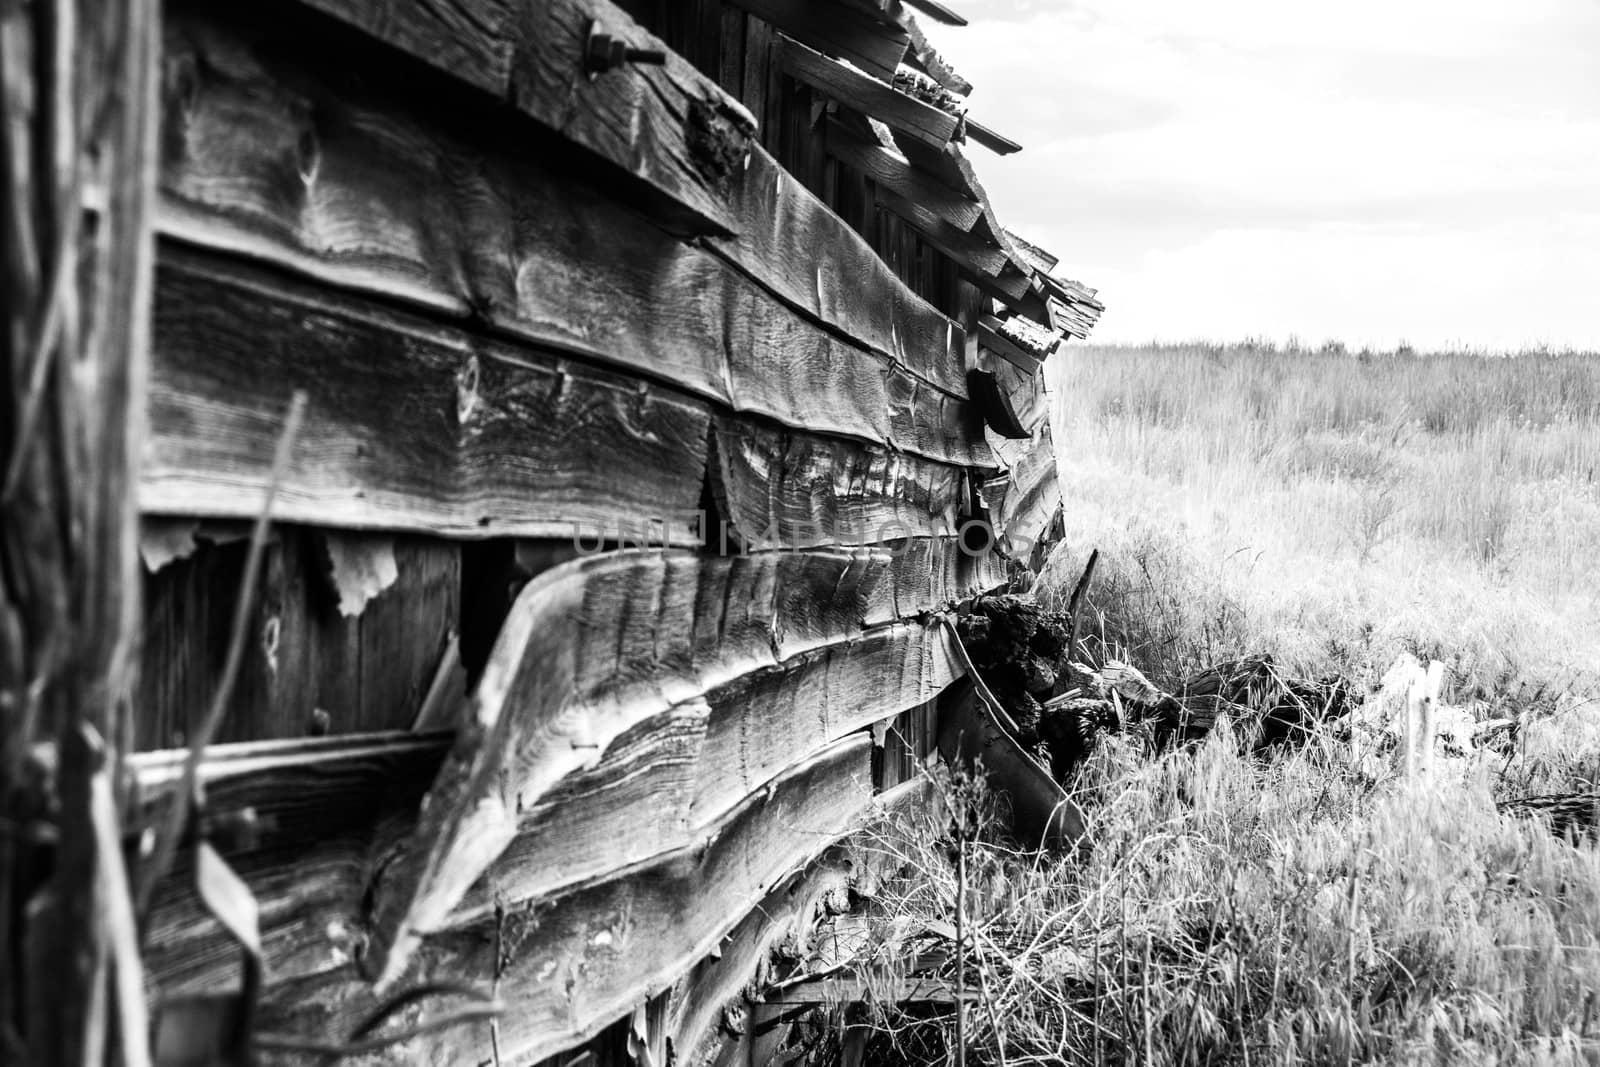 Weathered, collapsing Barn in the Palouse region of Eastern Washington